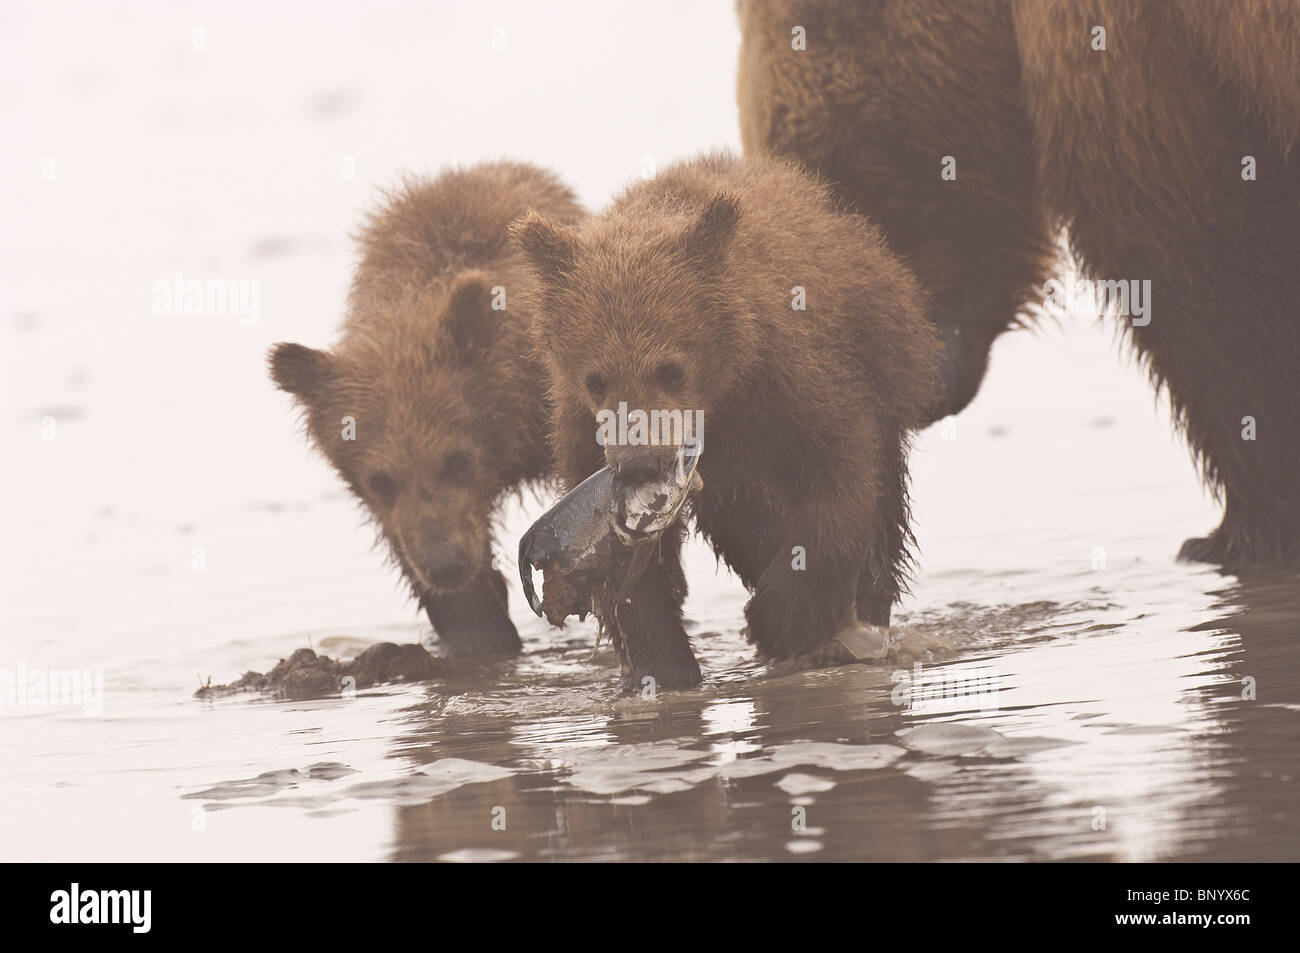 Stock photo of two Alaskan brown bear cubs playing with a fish. Stock Photo